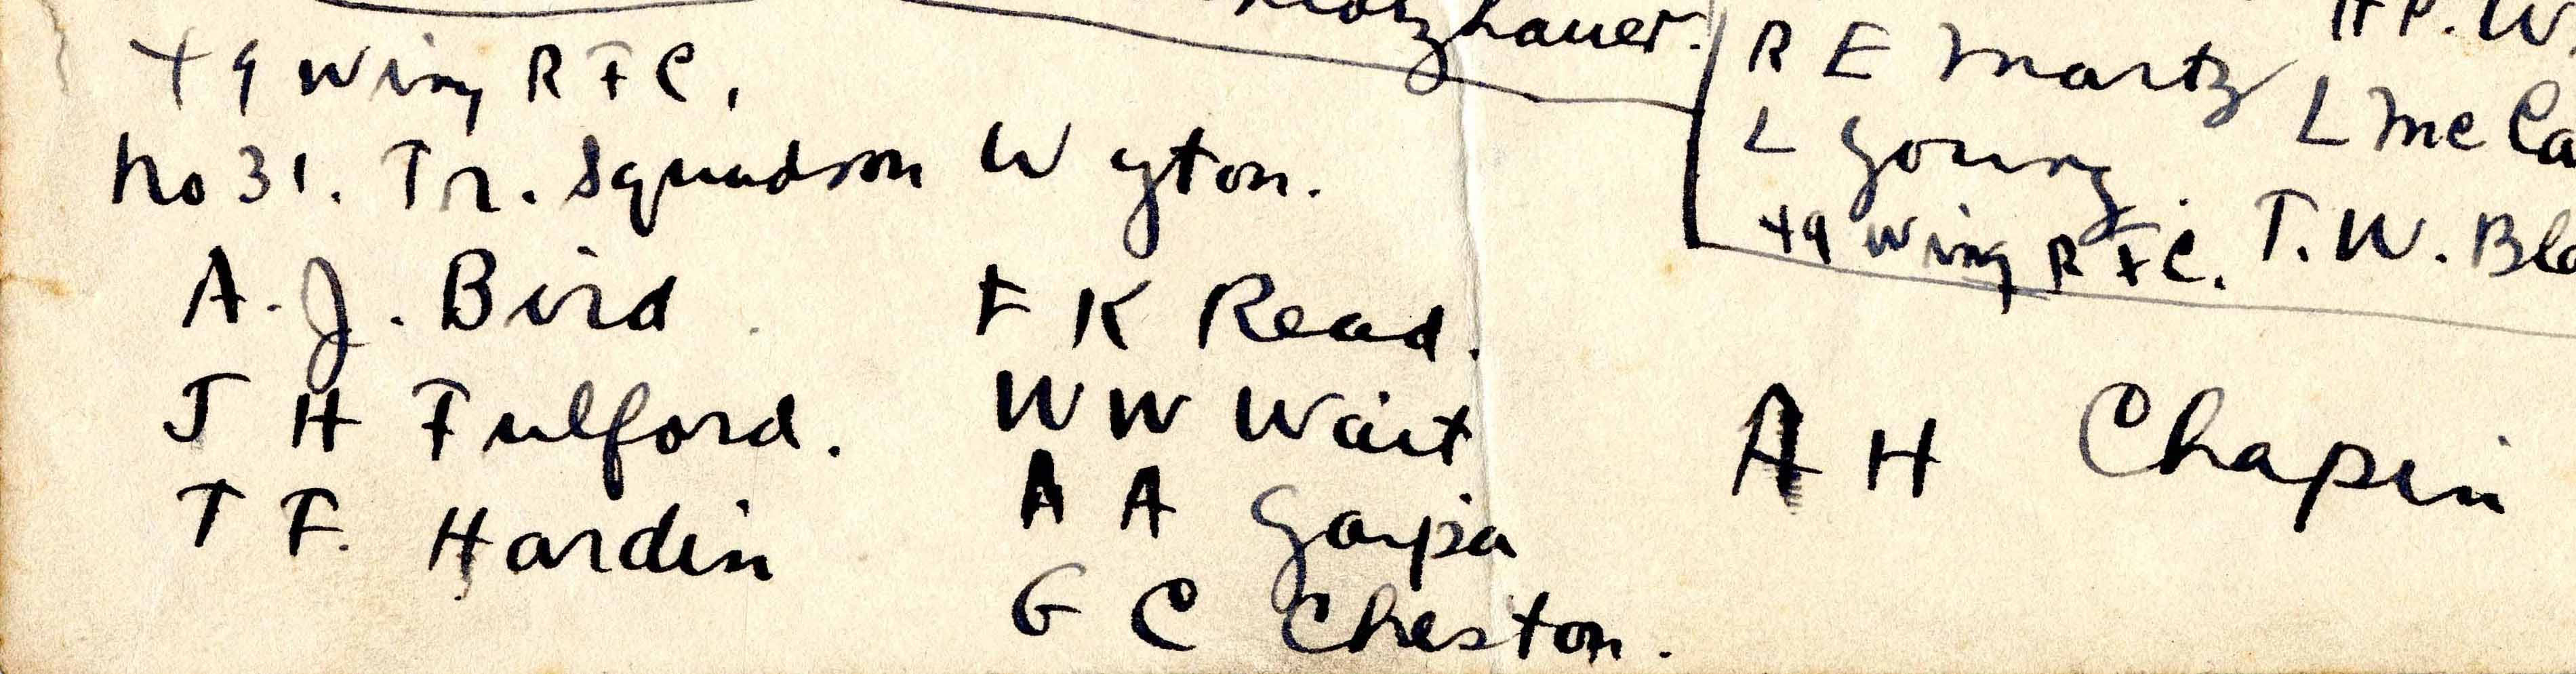 The bottom portion of Foss's list of who was posted where on December 3, 1917, showing the men who went to Wyton.